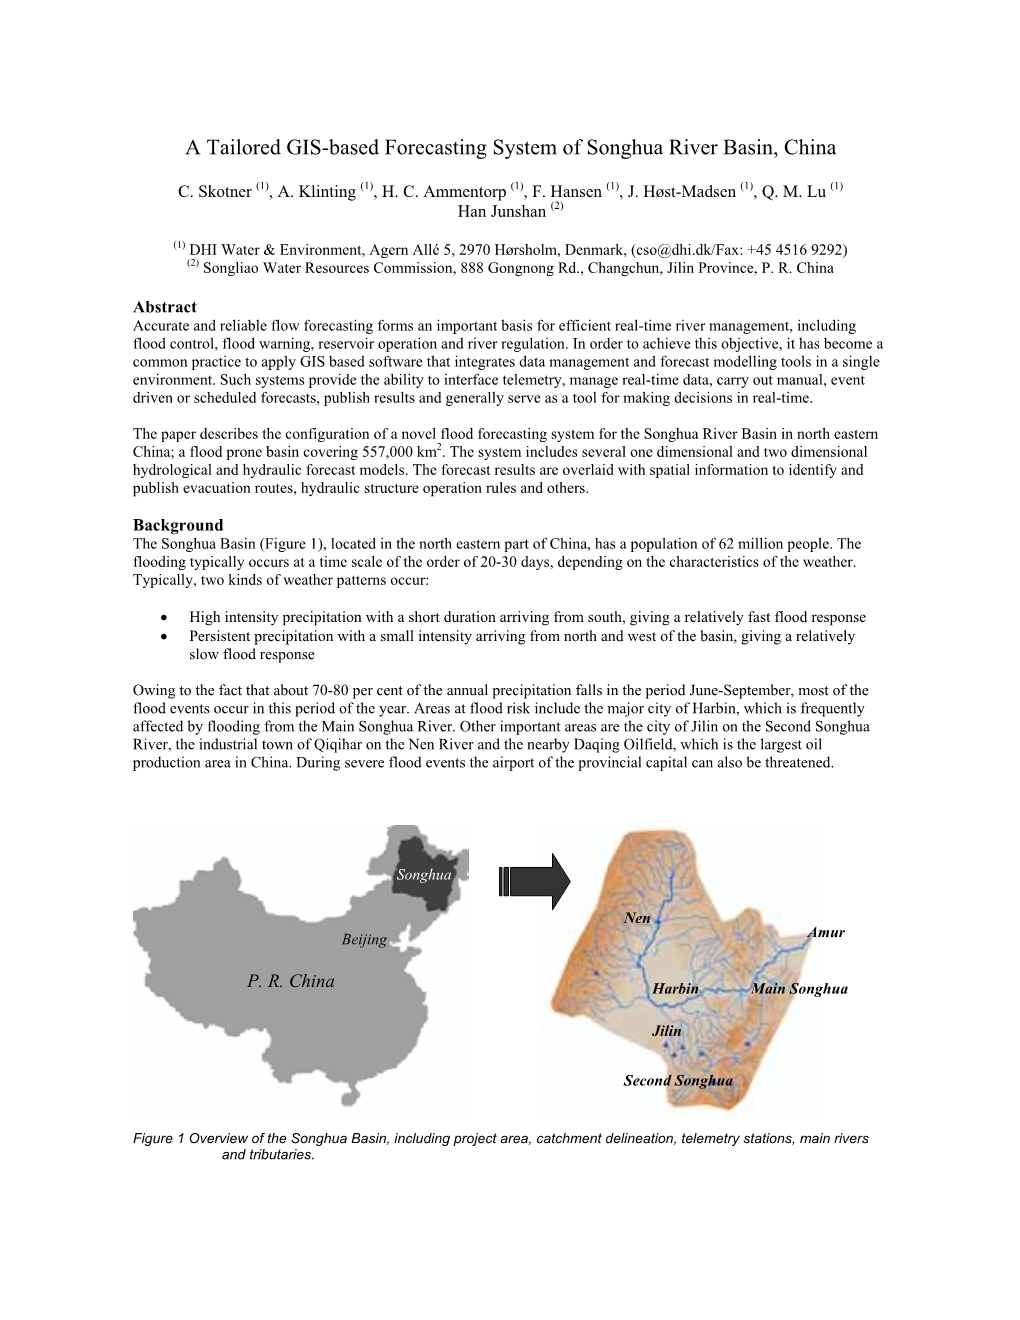 A Tailored GIS-Based Forecasting System of Songhua River Basin, China